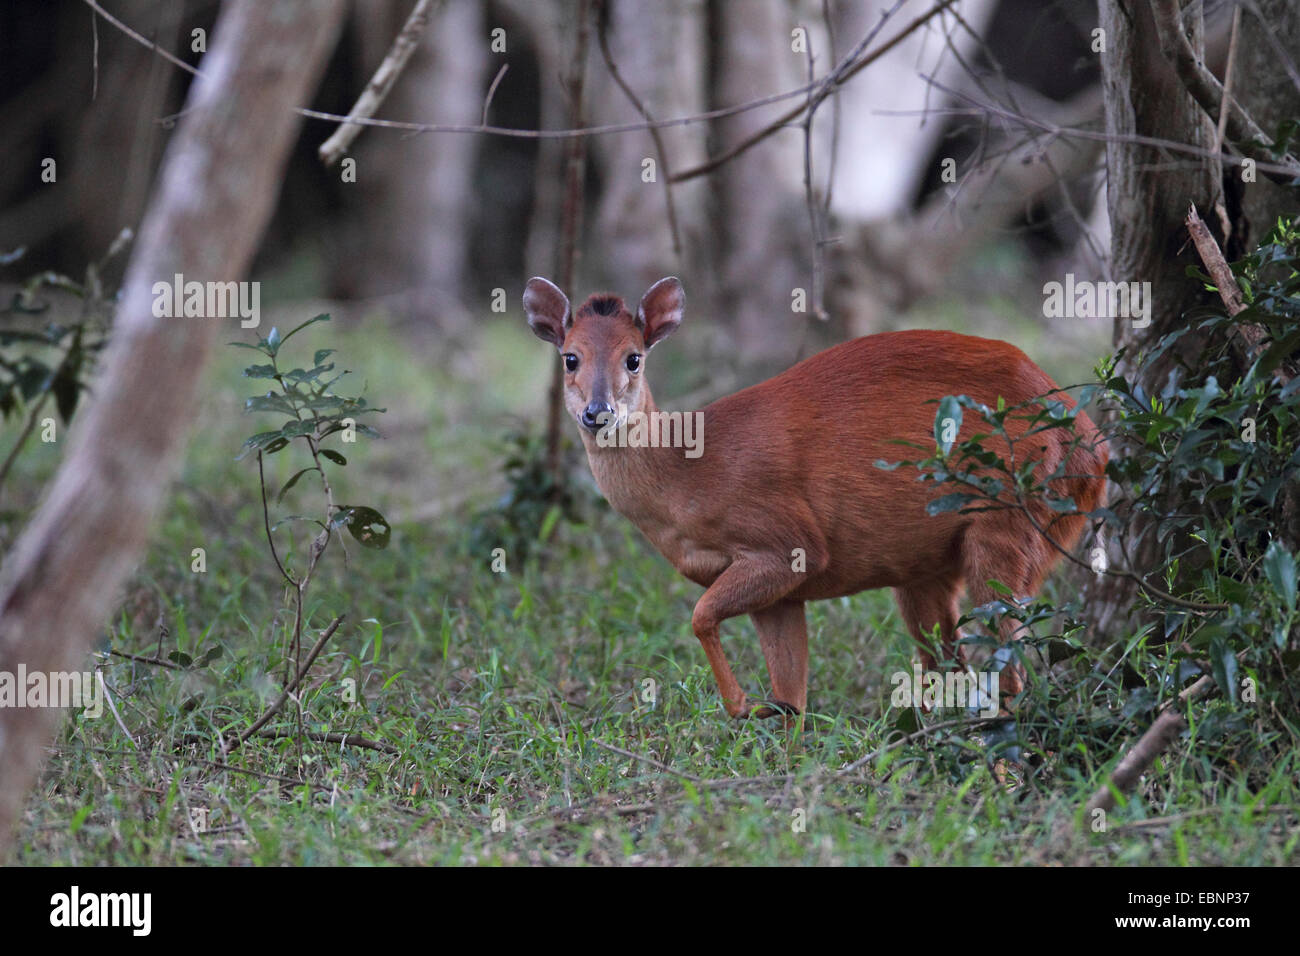 red forest duiker (Cephalophus natalensis), stands in a wood, South Africa, iSimangaliso Wetland Park Stock Photo